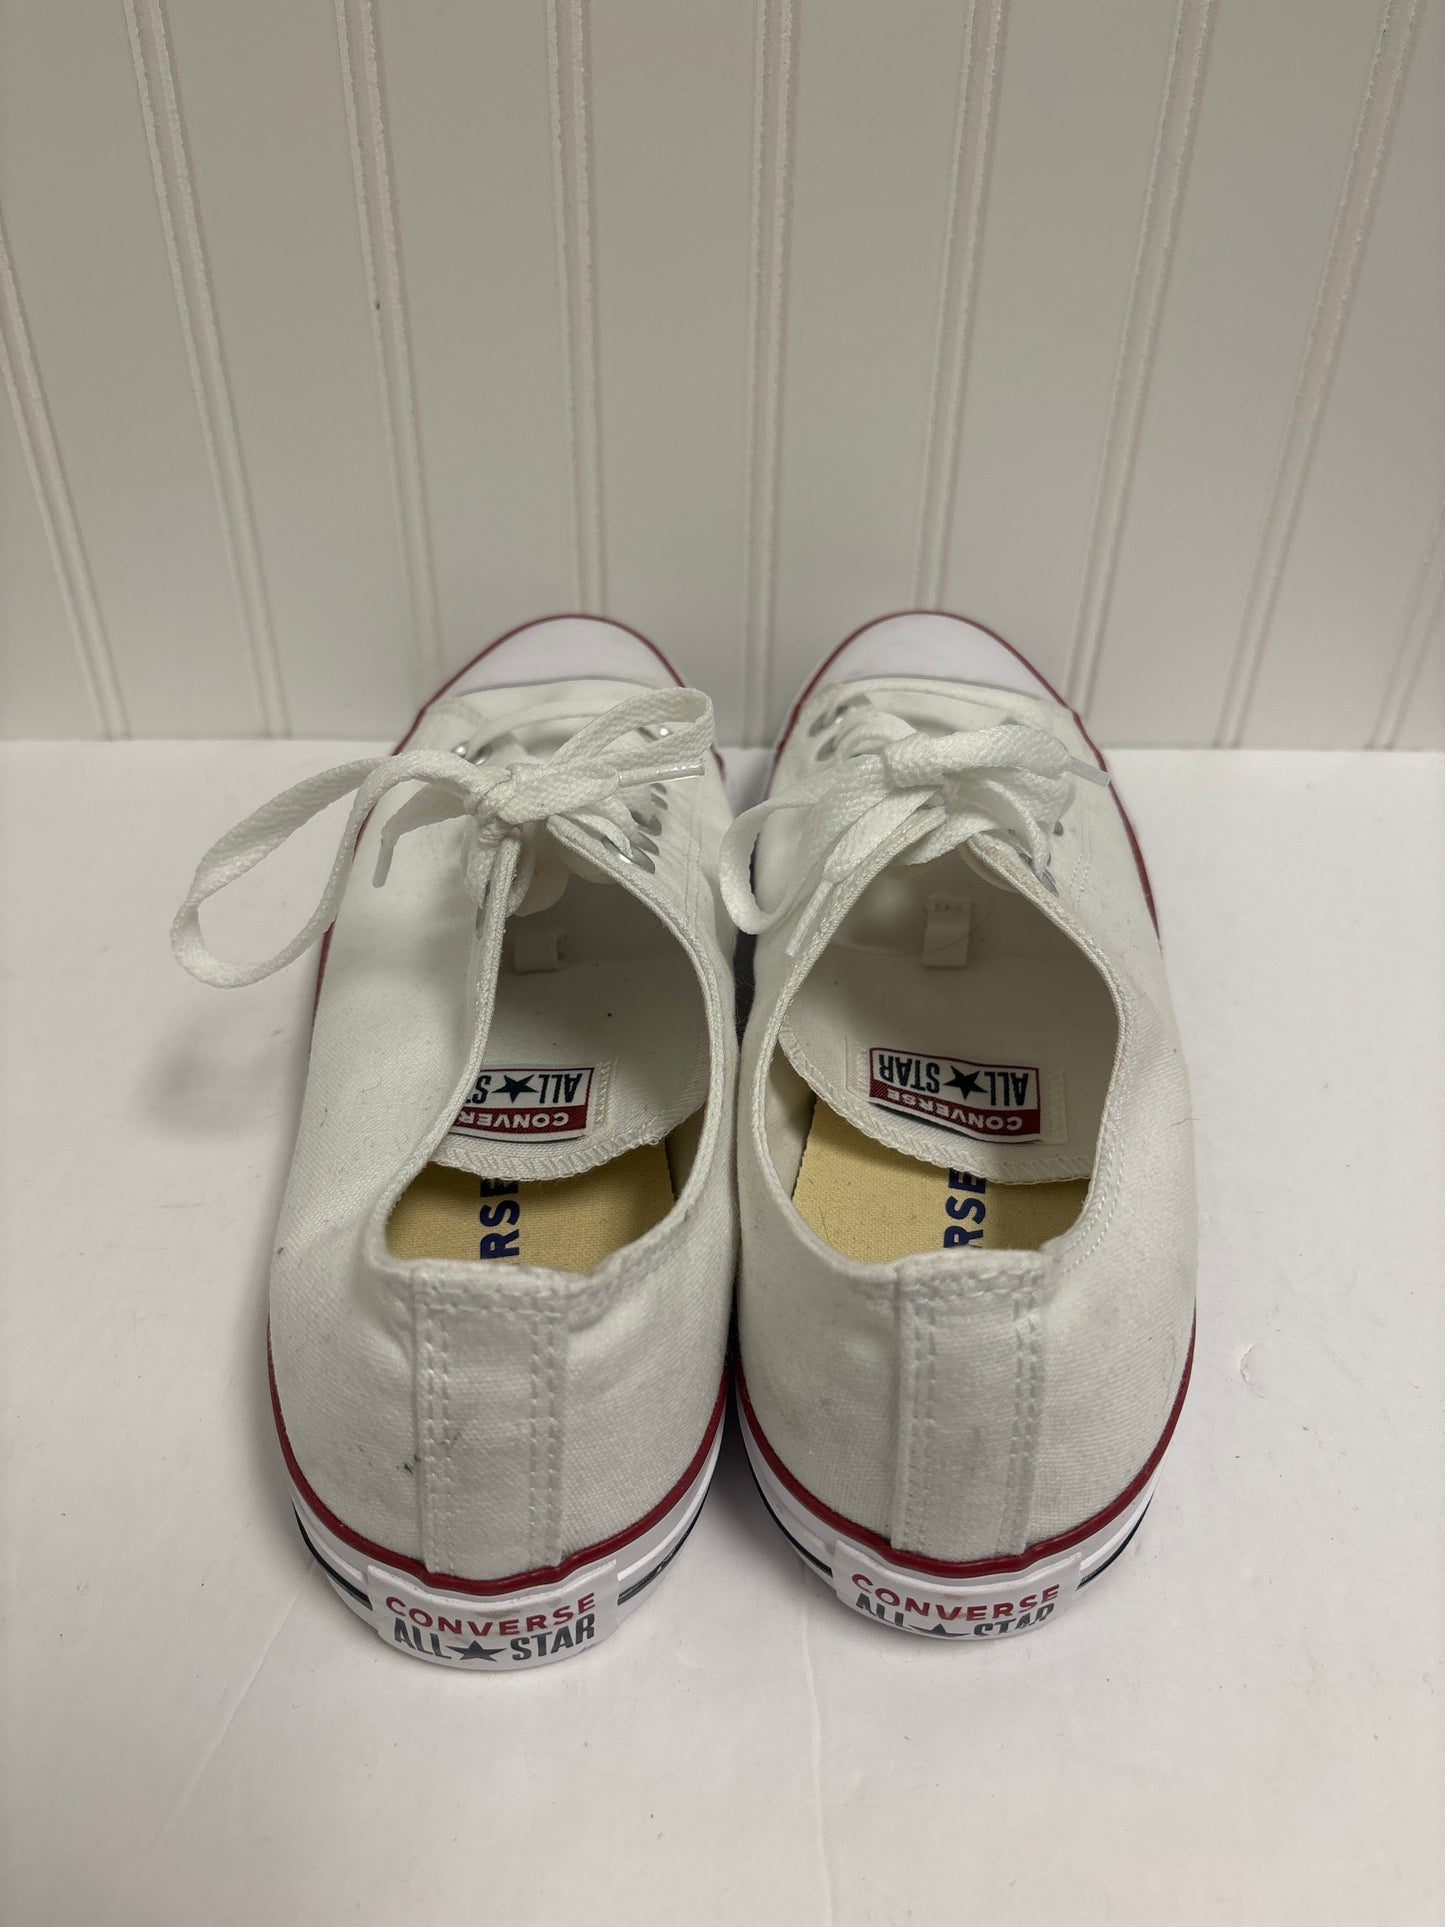 White Shoes Sneakers Converse, Size 10